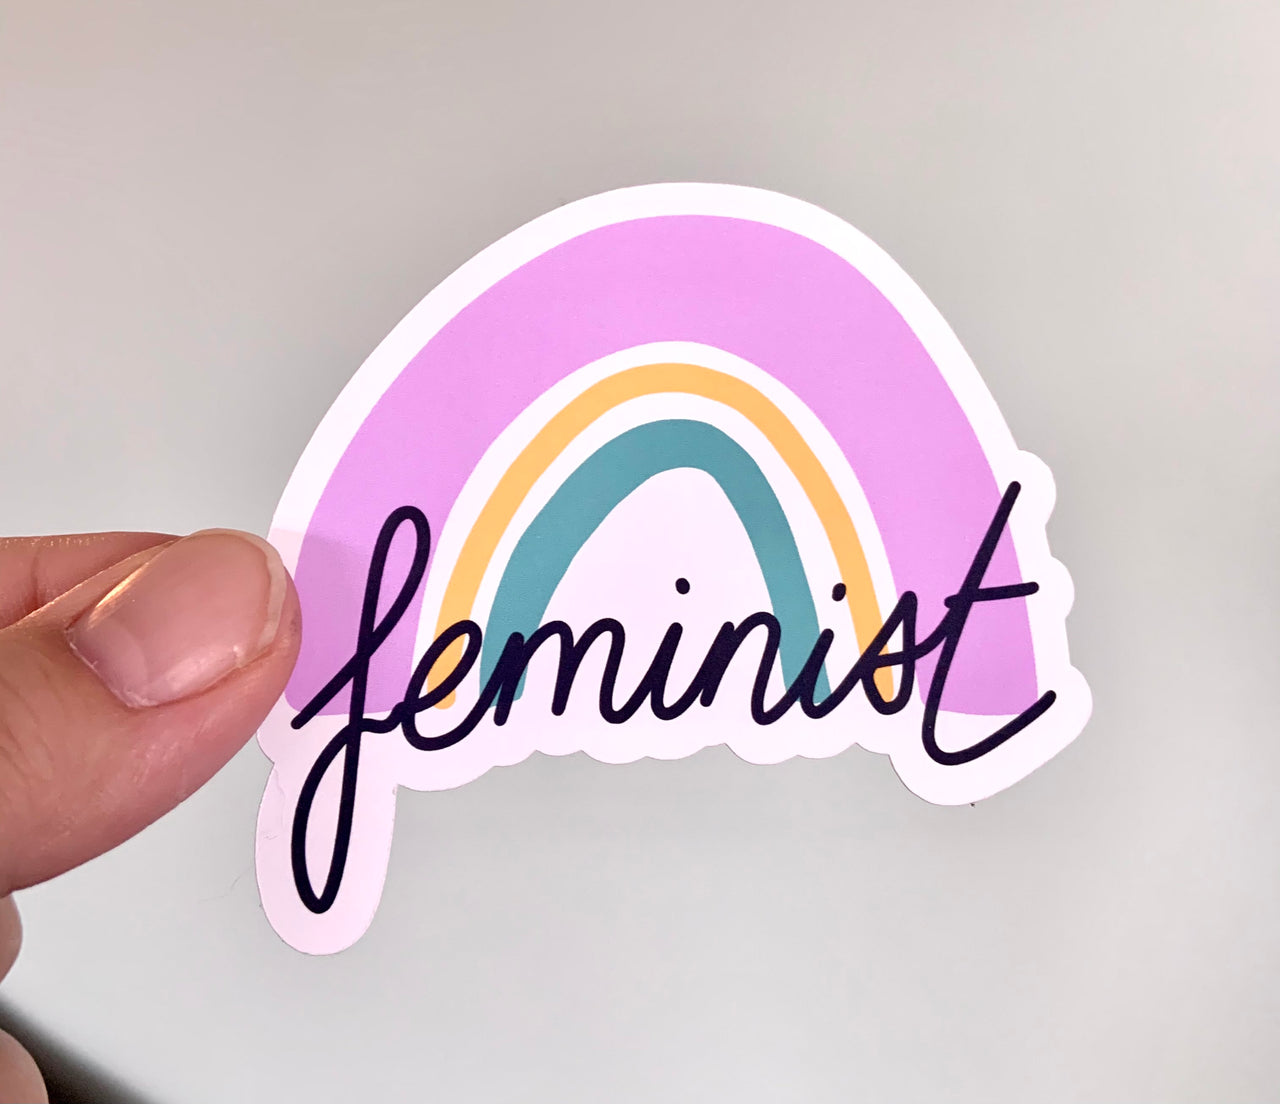 Feminist (pack of 3 or 5 stickers)